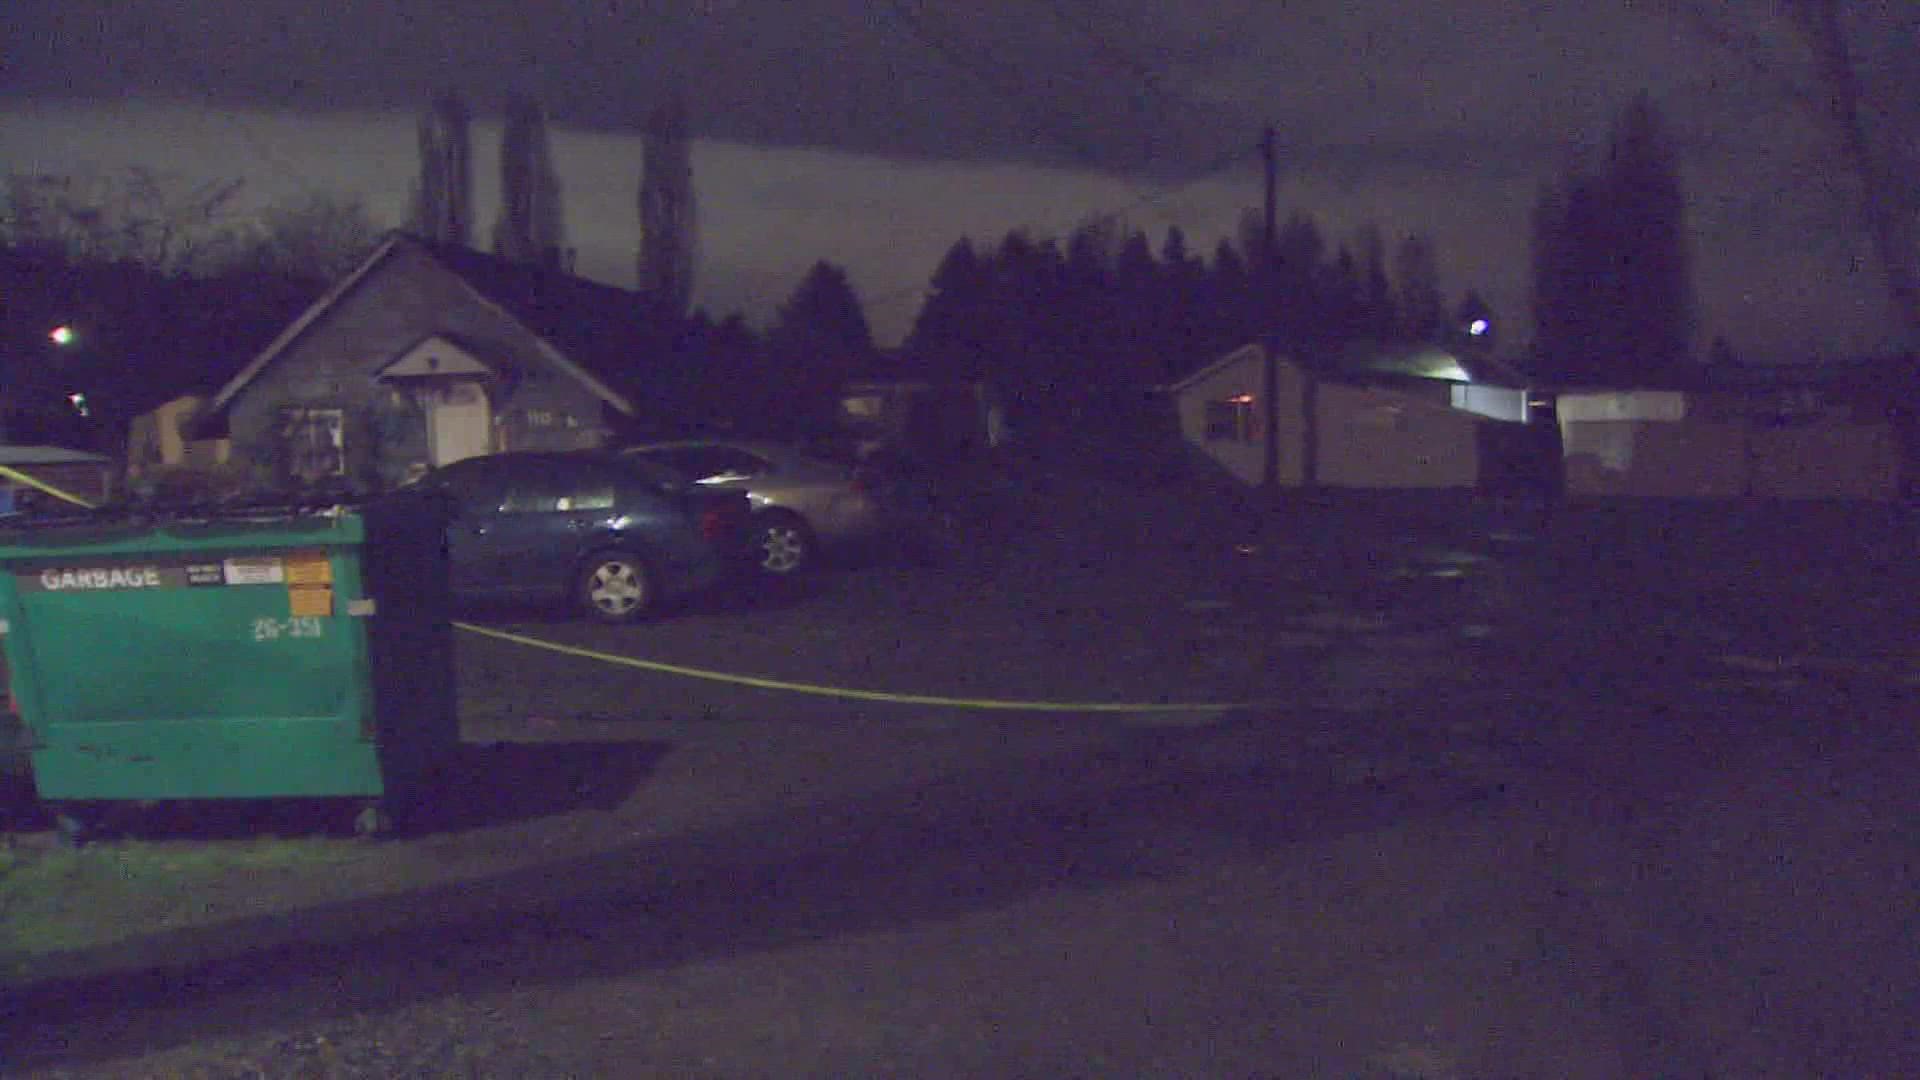 A 3-year-old boy died after being shot in his home in Puyallup Monday.